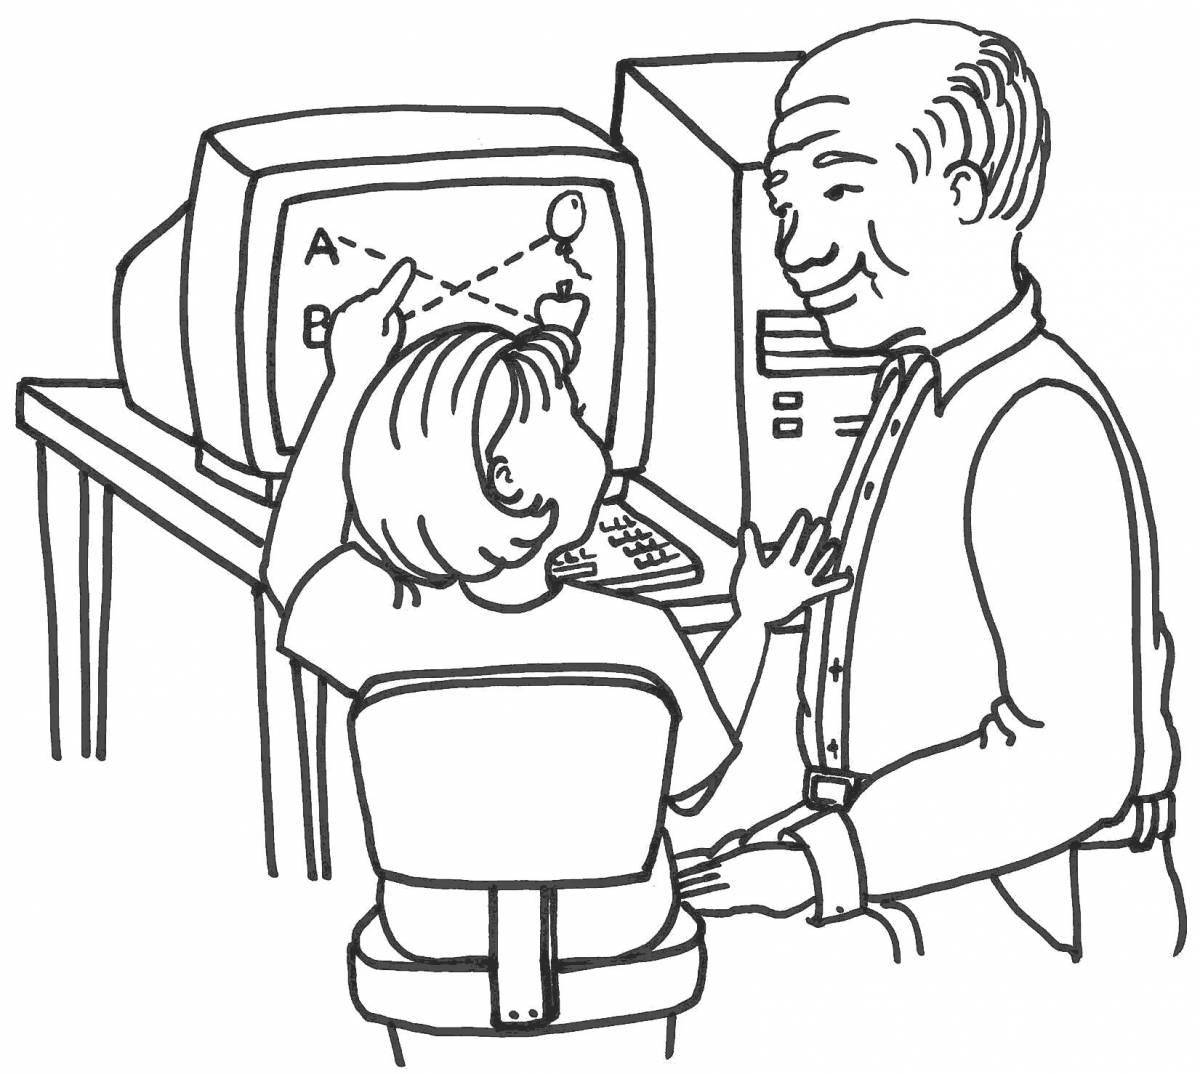 Safe internet coloring page for students